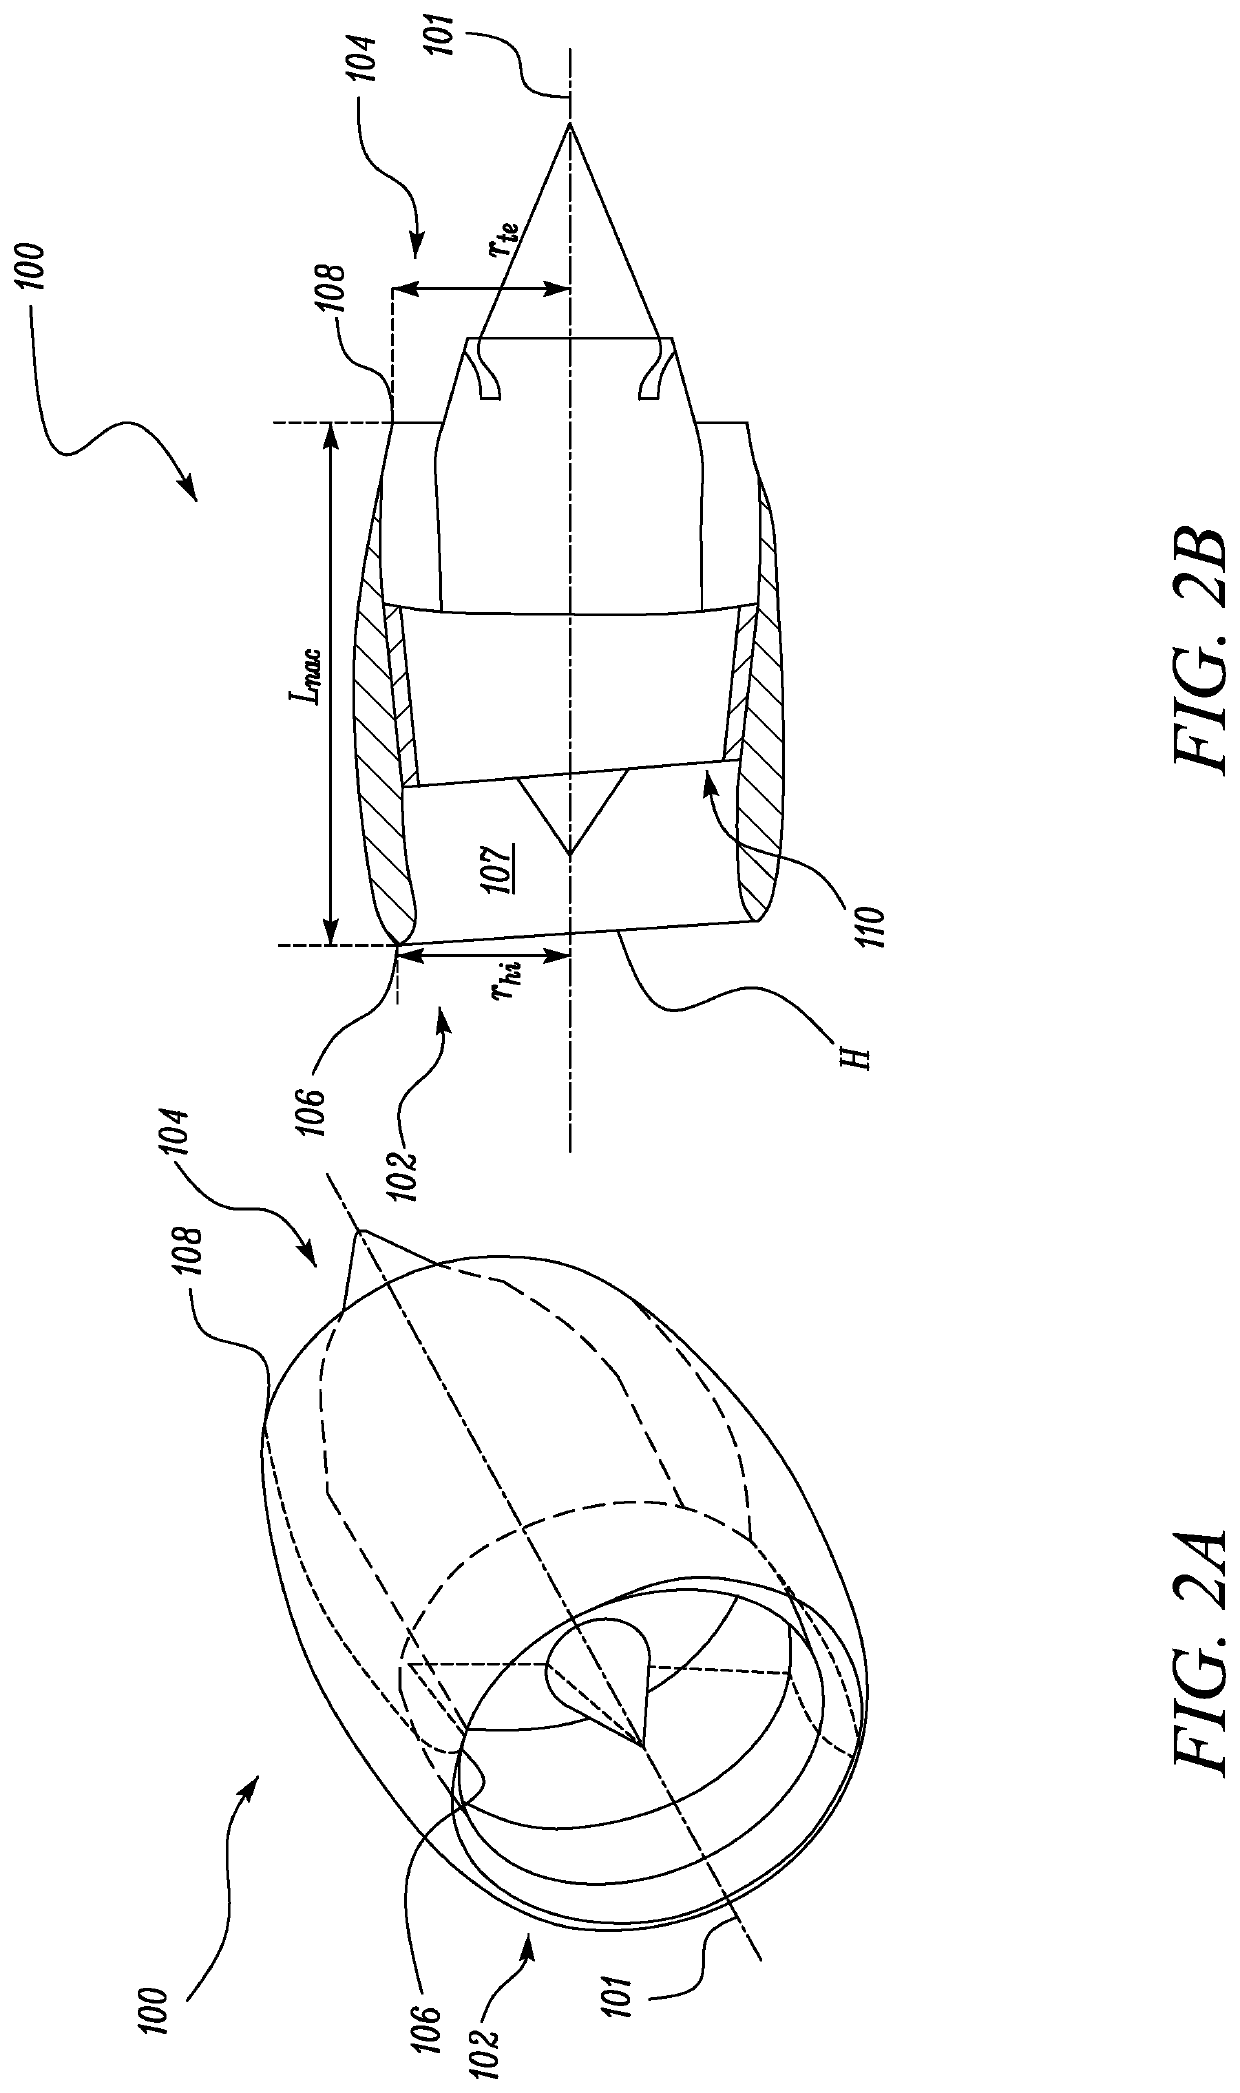 Nacelle for a gas turbine engine